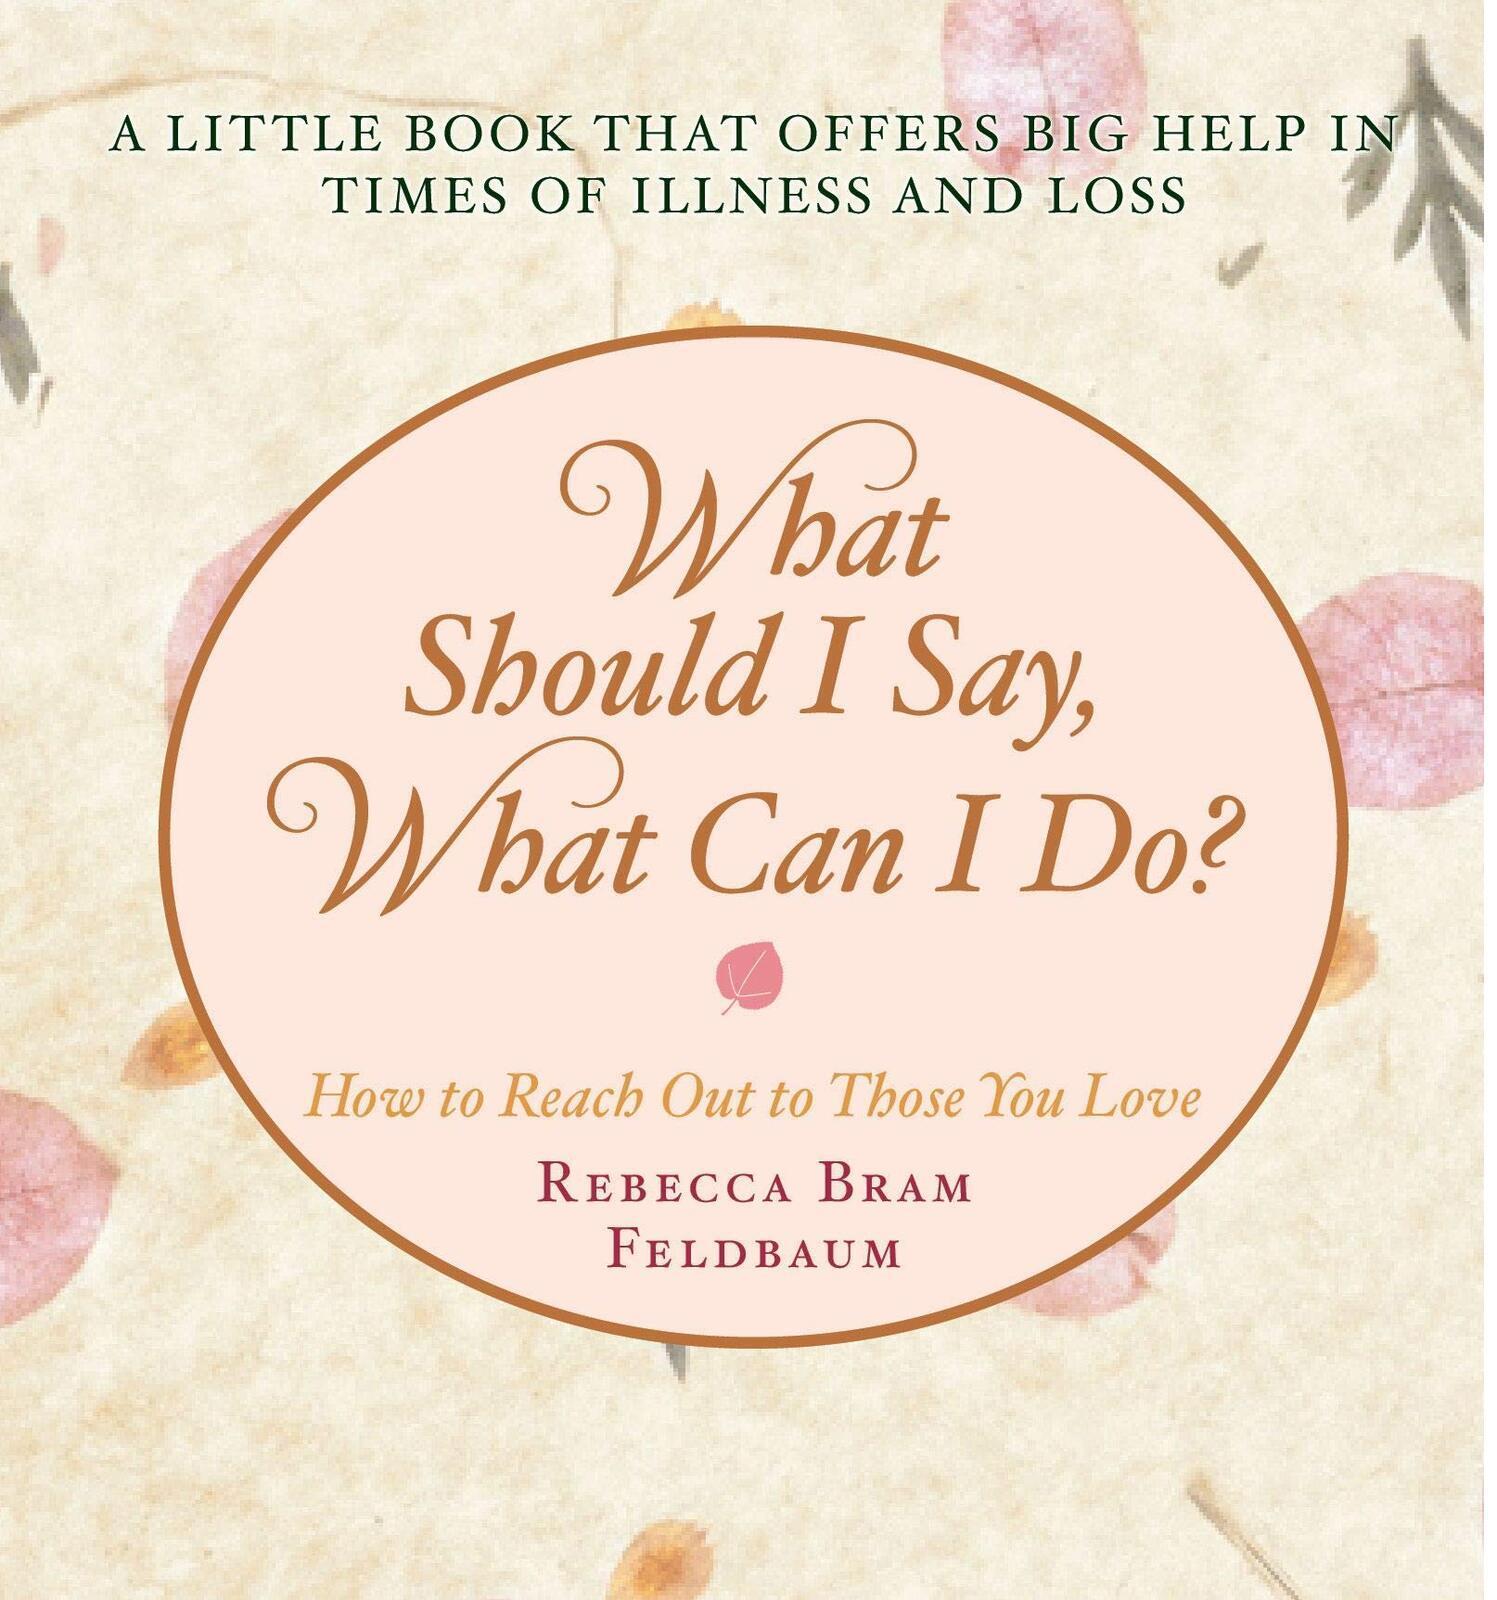 What Should I Say, What Can I Do?: How to Reach Out to Those You Love